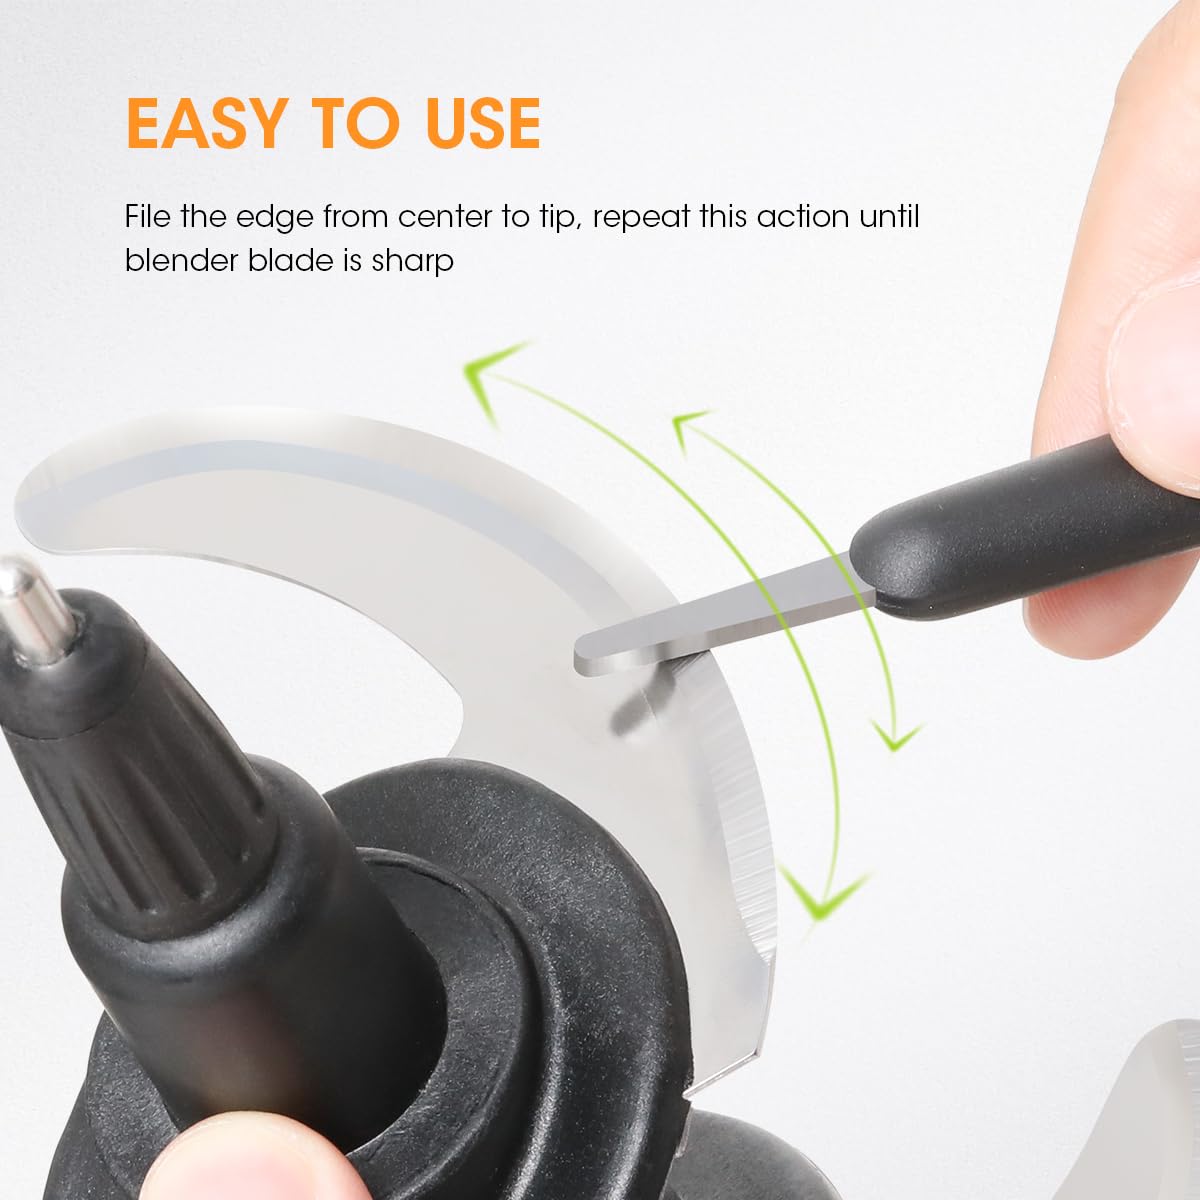 easy to use, file the edge from center to tip, repeat this action until blender blade is sharp